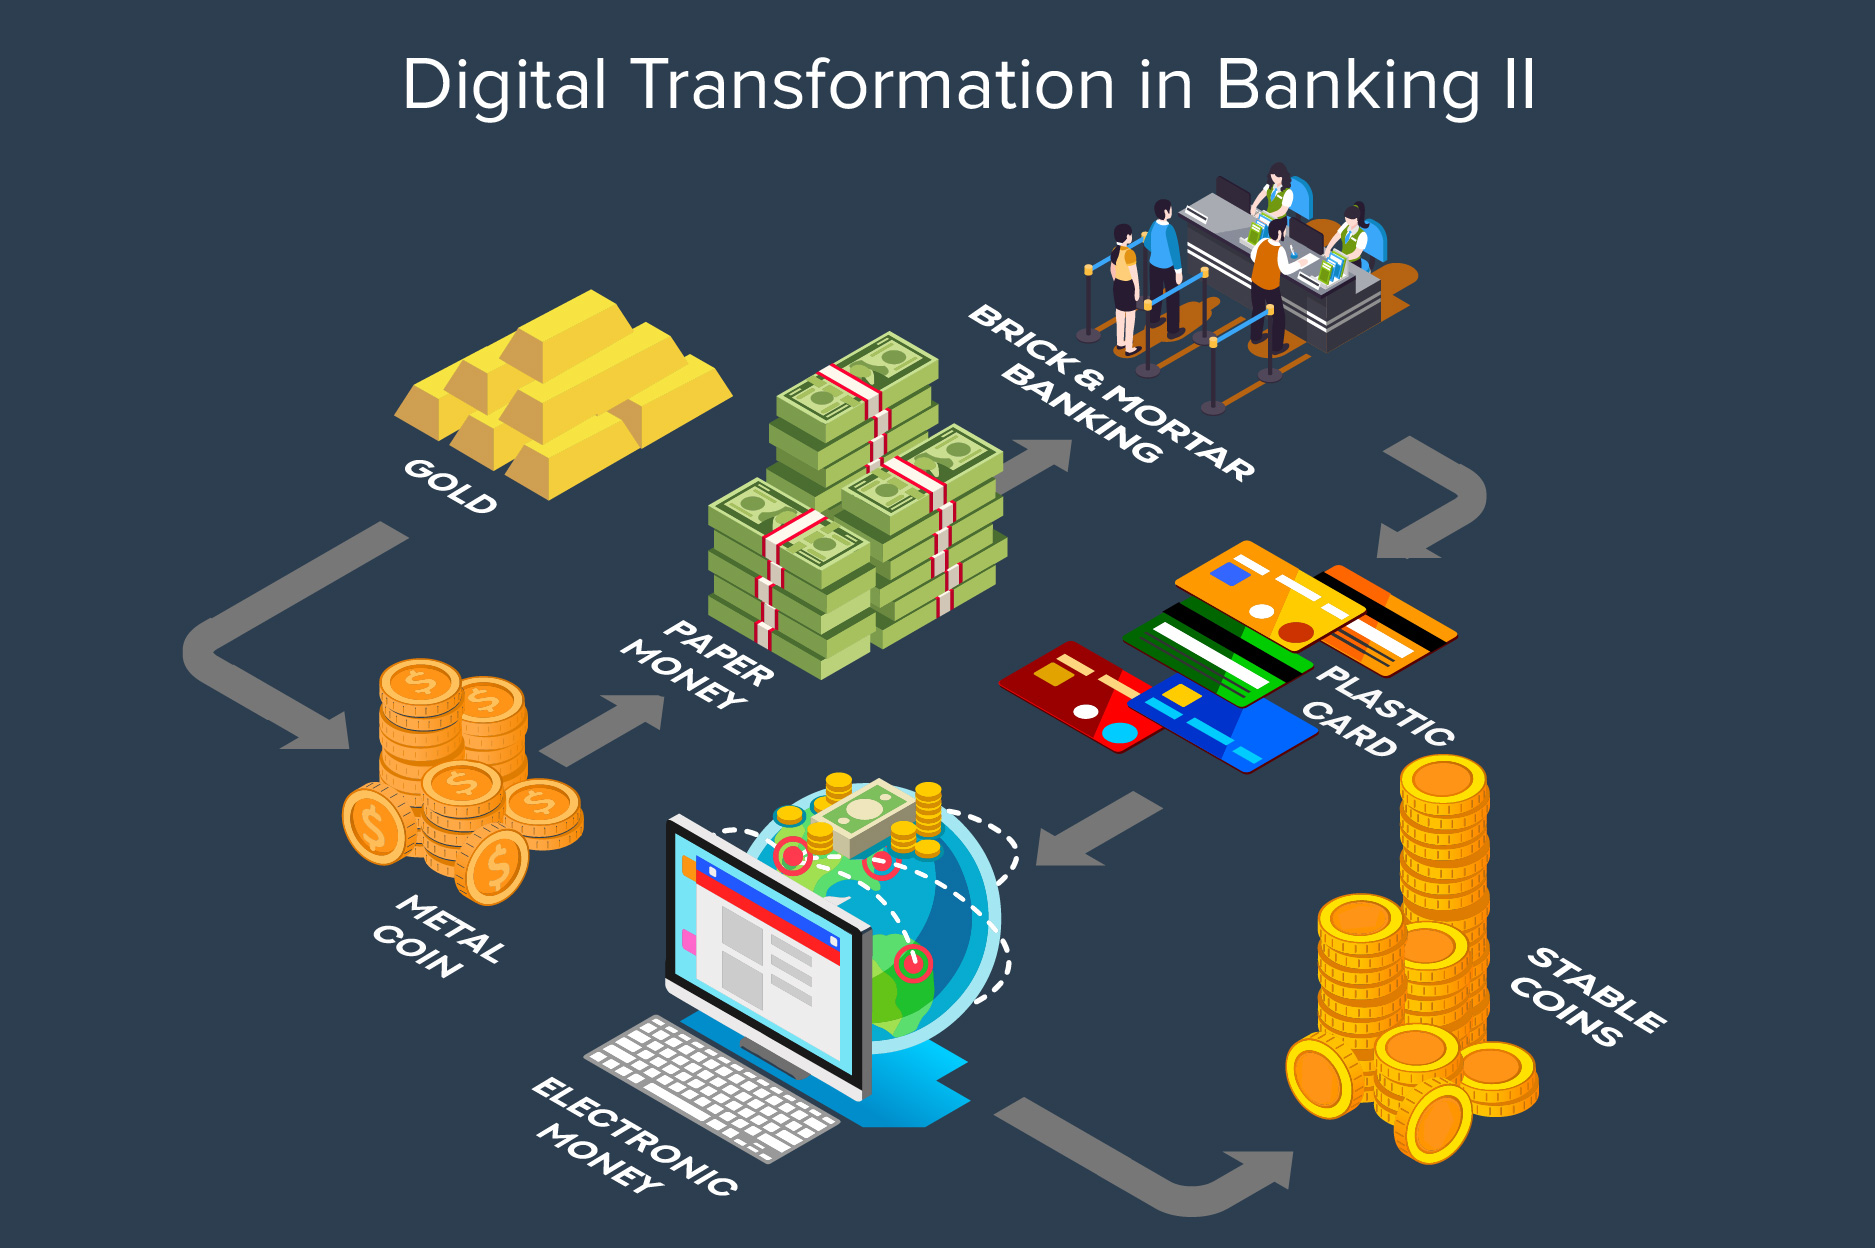 Top 7 trends driving digital transformation in banking (II) - Akeo